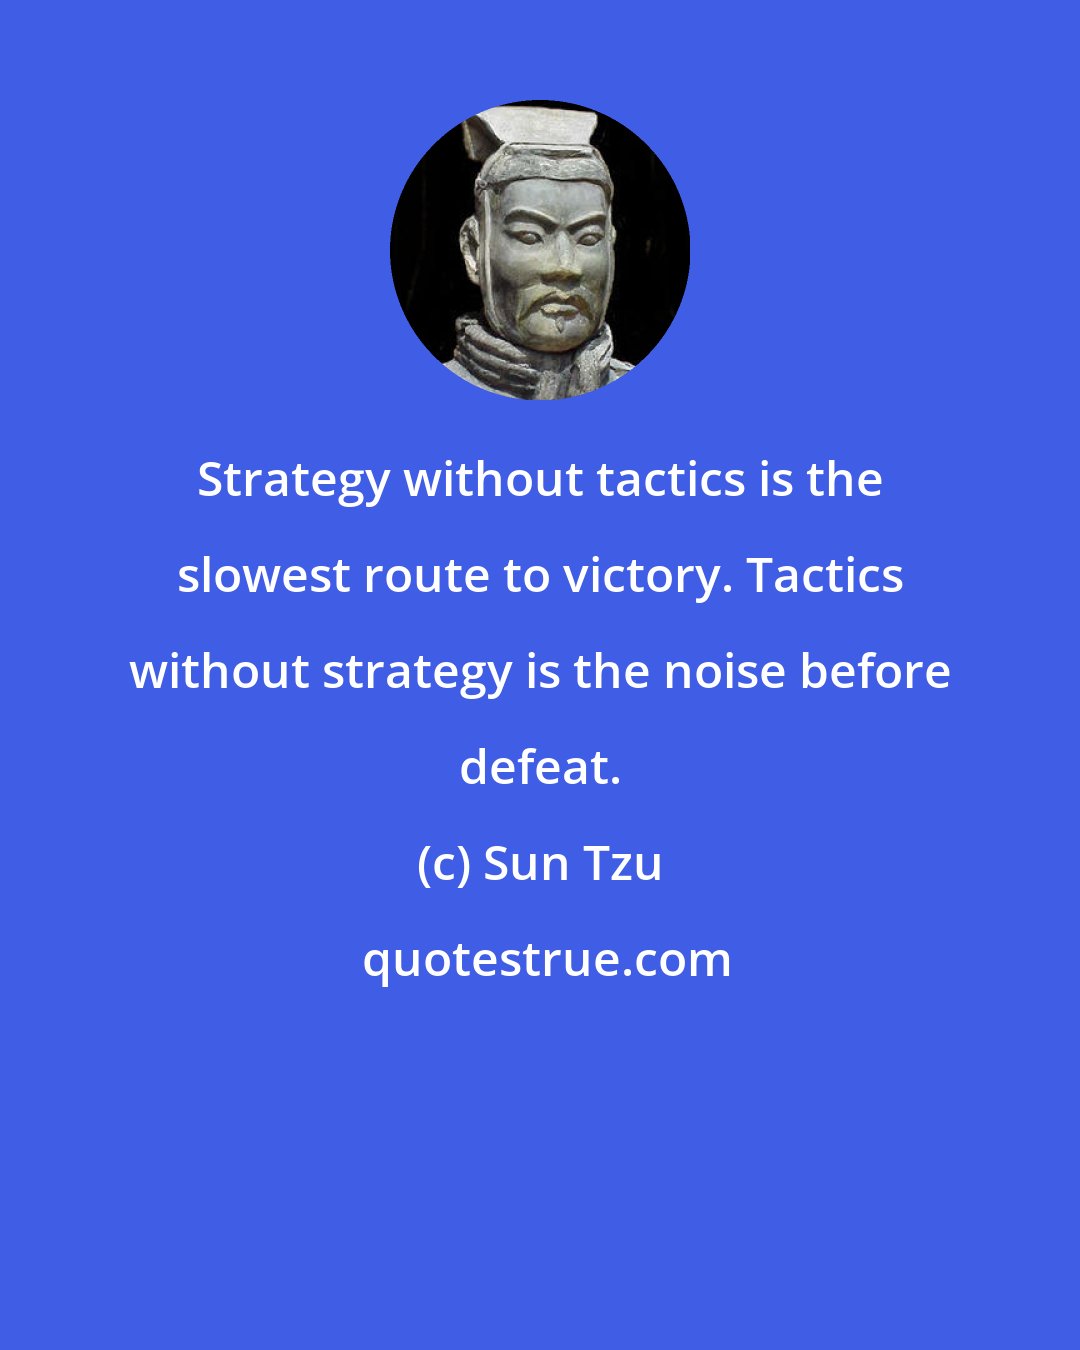 Sun Tzu: Strategy without tactics is the slowest route to victory. Tactics without strategy is the noise before defeat.